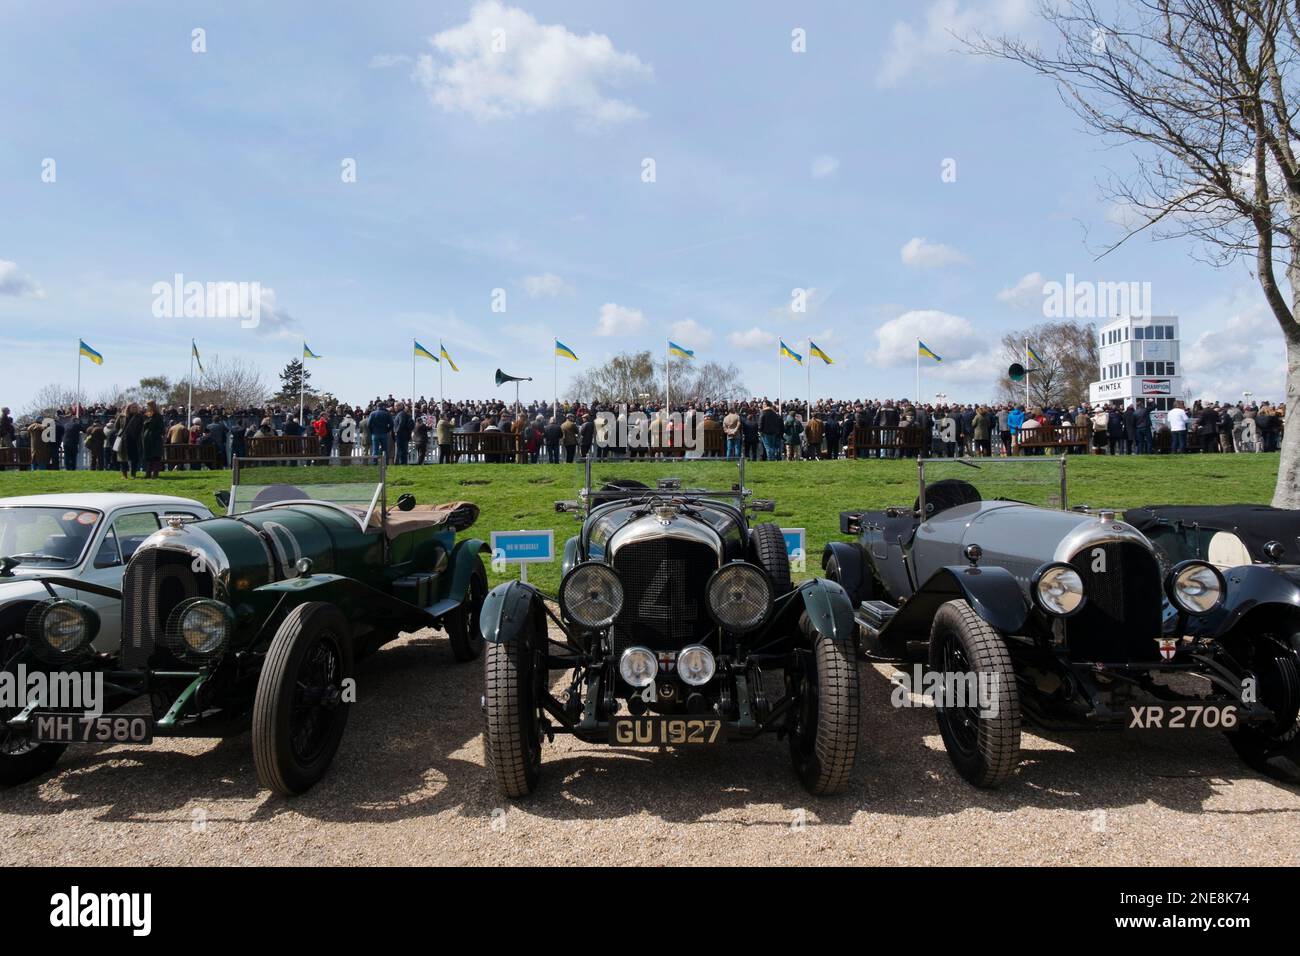 1930er Bentley Blowers in the Governers' Parking at the 79. Members' Meeting, Goodwood Motor Racing Circuit, Chichester, West Sussex, Großbritannien Stockfoto